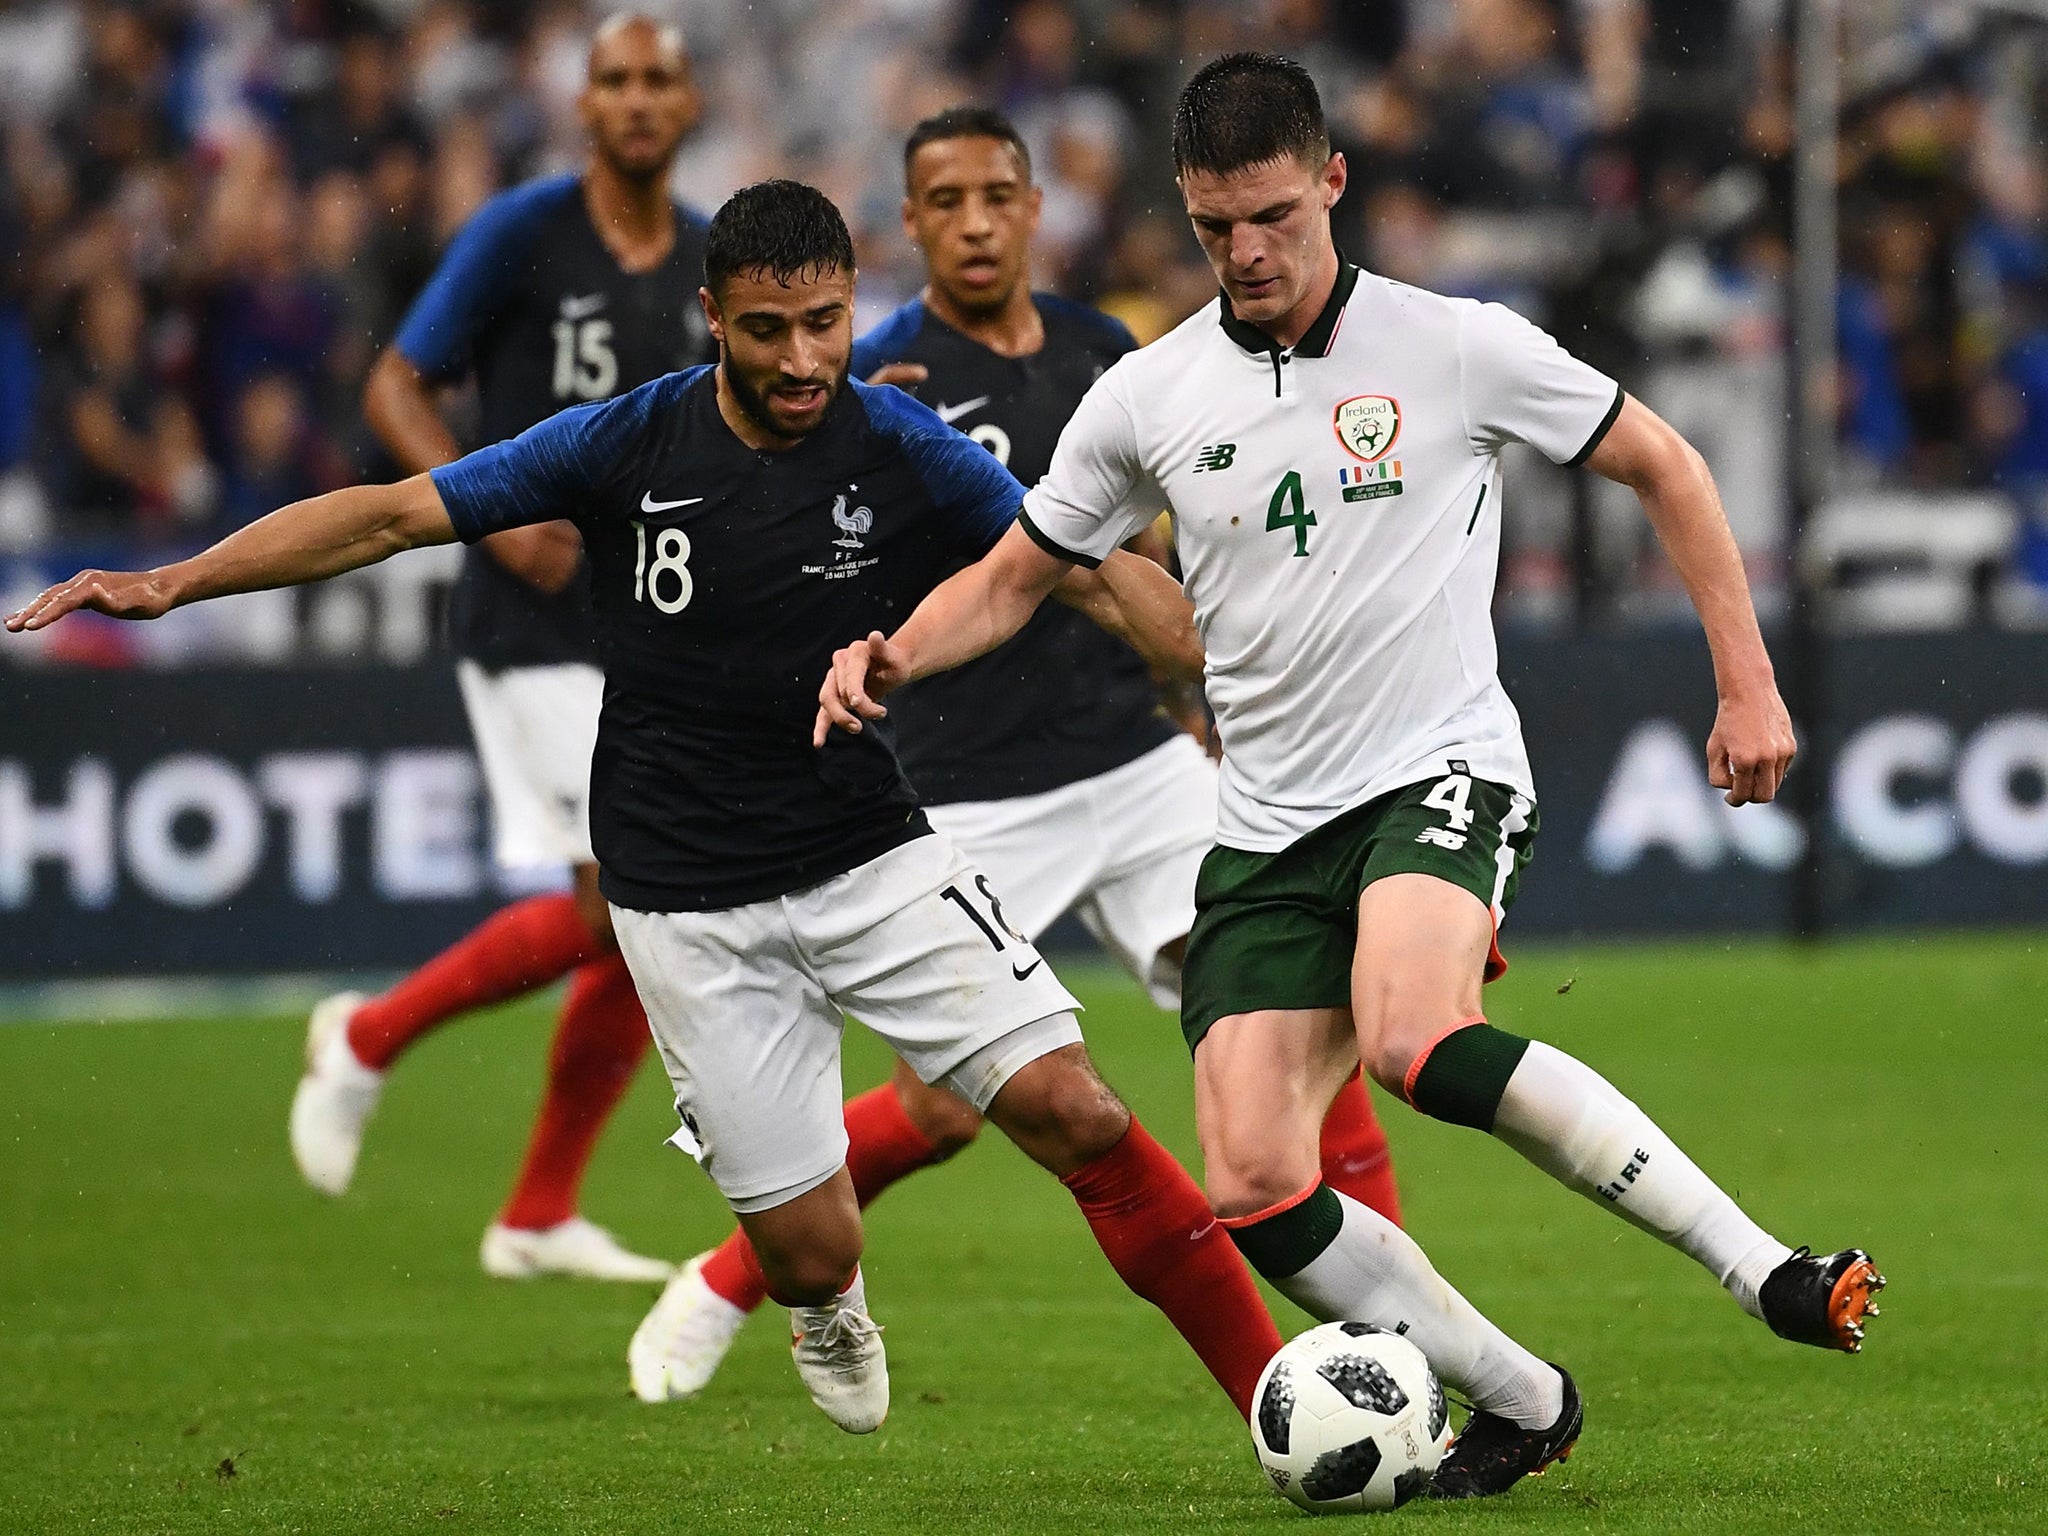 Declan Rice has decided to switch allegiance from the Republic of Ireland to England